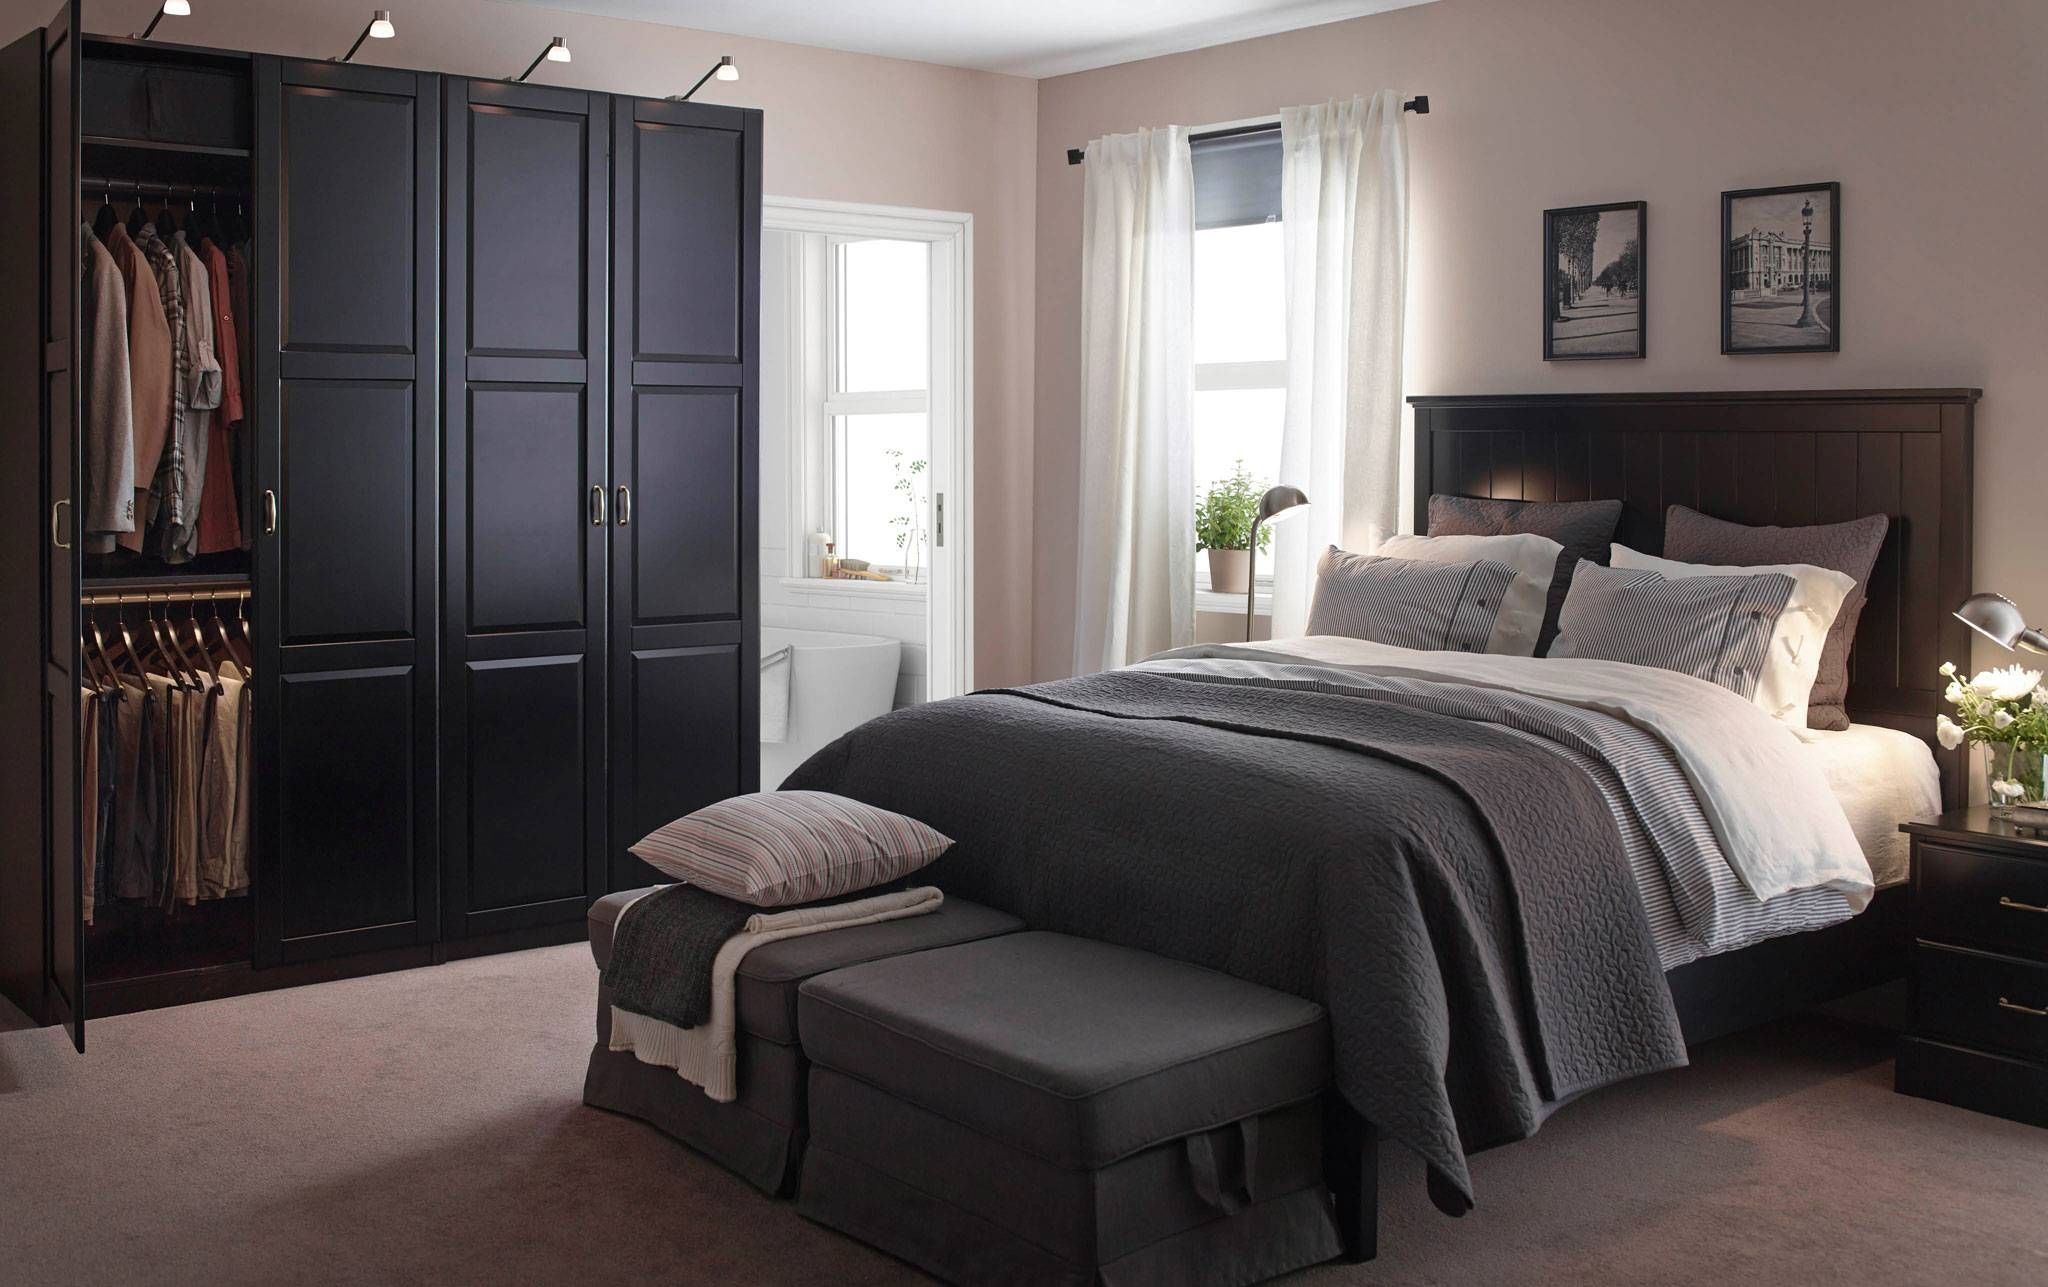 Bedroom Furniture & Ideas | Ikea Intended For Wardrobes Beds (View 9 of 15)